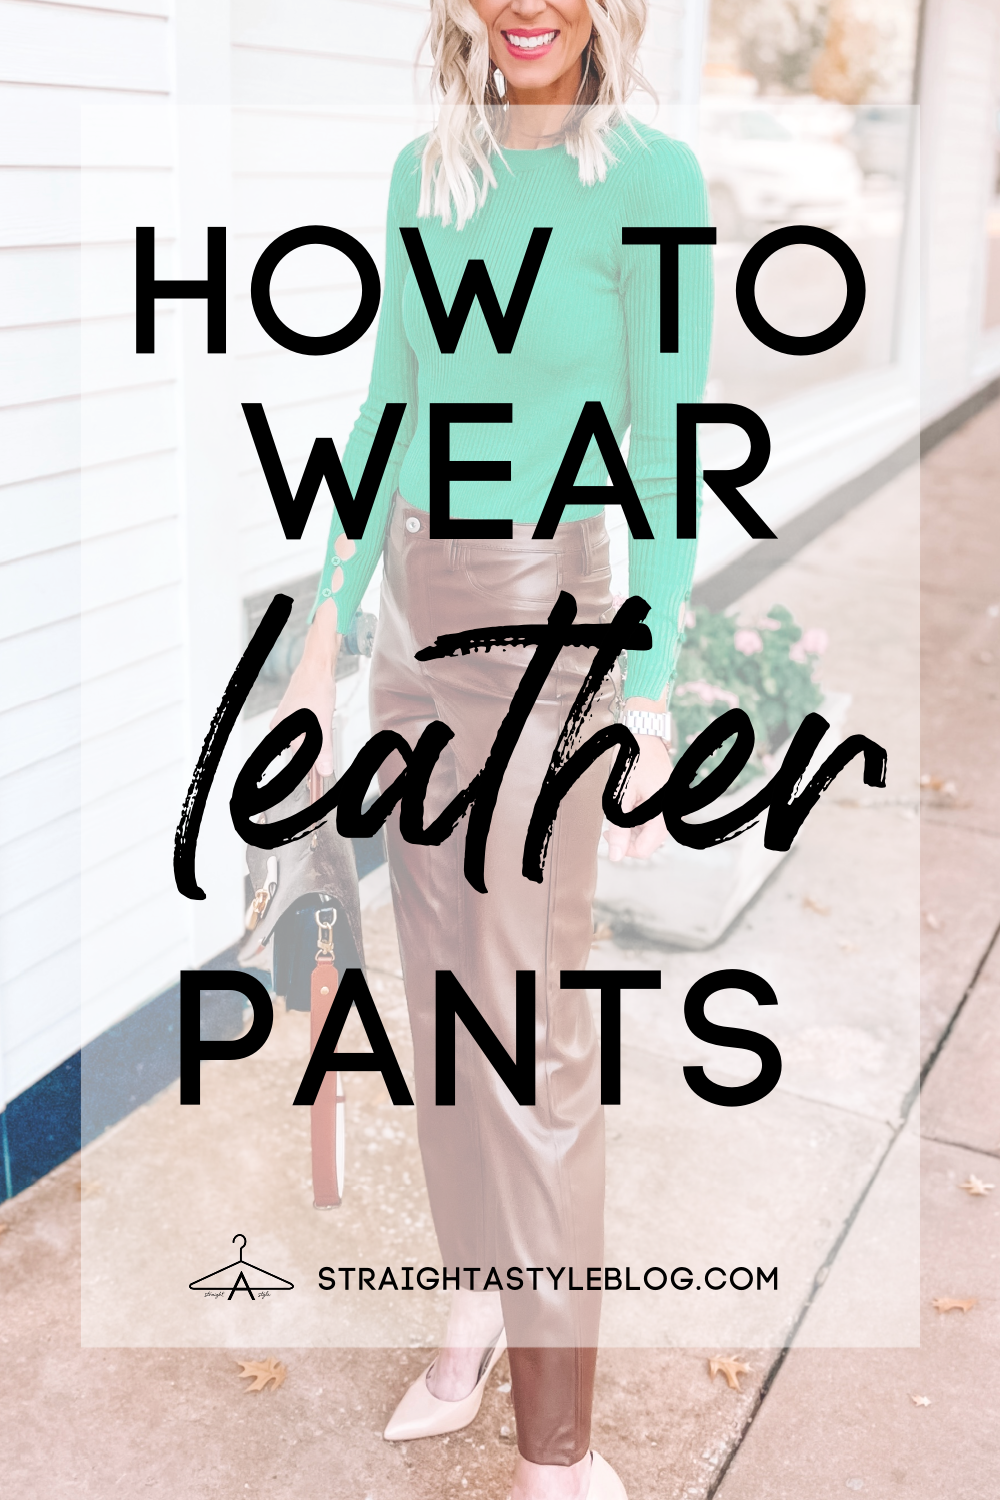 I Wear These Faux Leather Leggings From  Practically Every Day